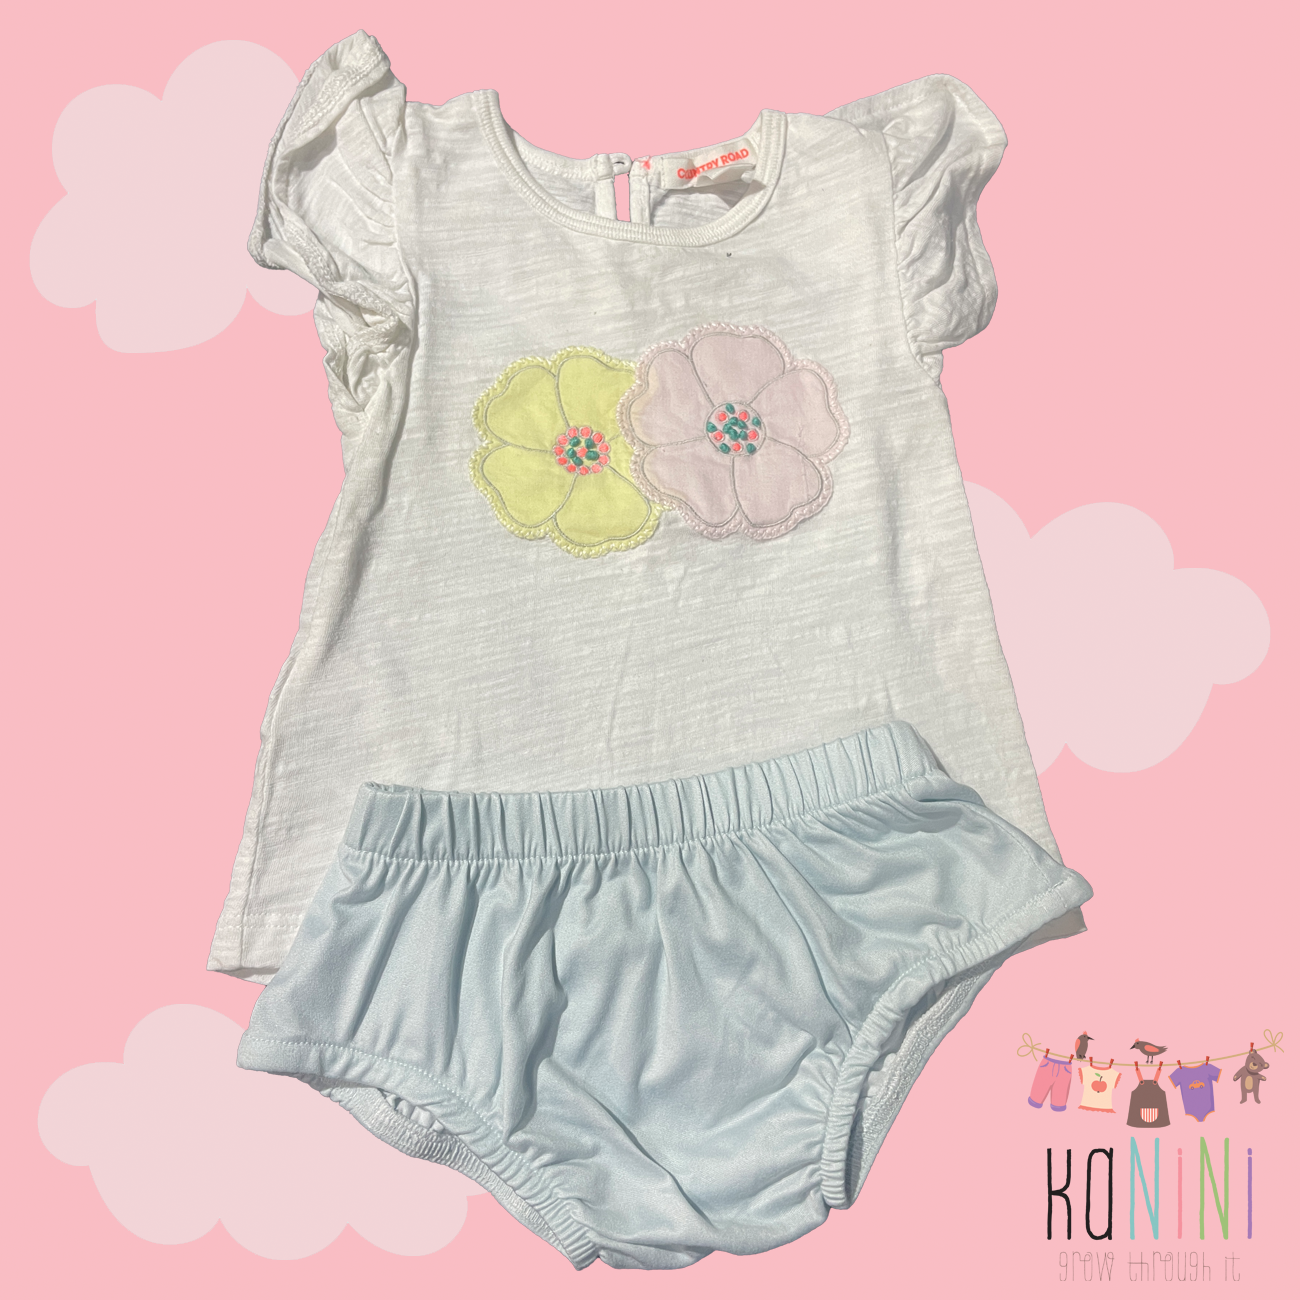 Featured image for “Country Road 3 - 6 Months Girls T-Shirt & Diaper Cover Set”